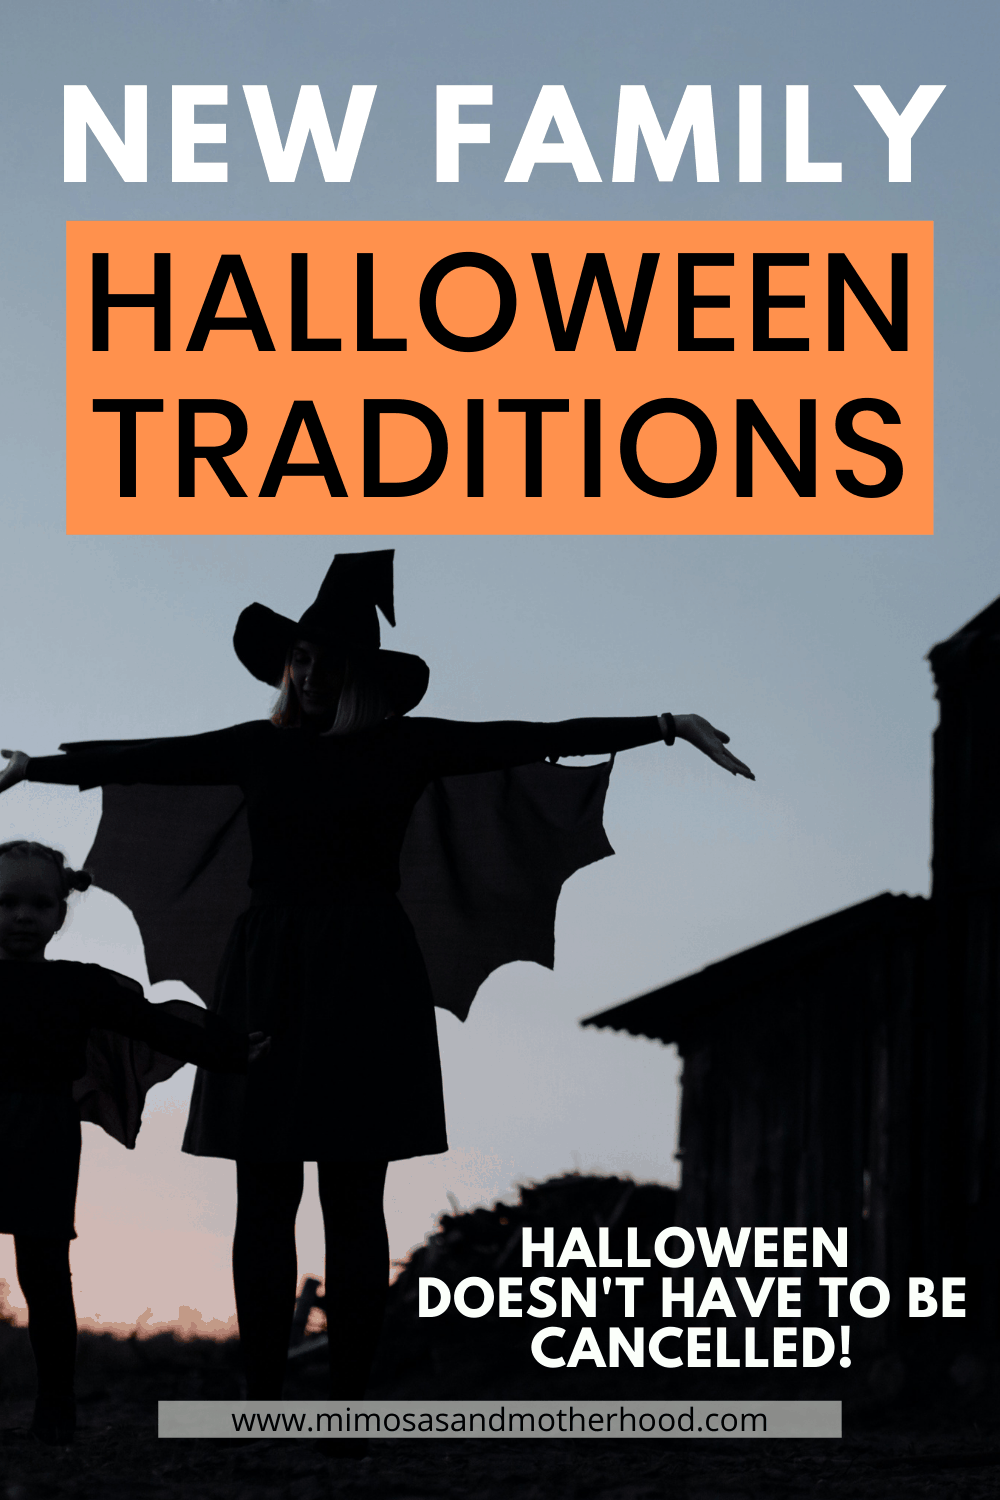 Start A New Family Halloween Tradition